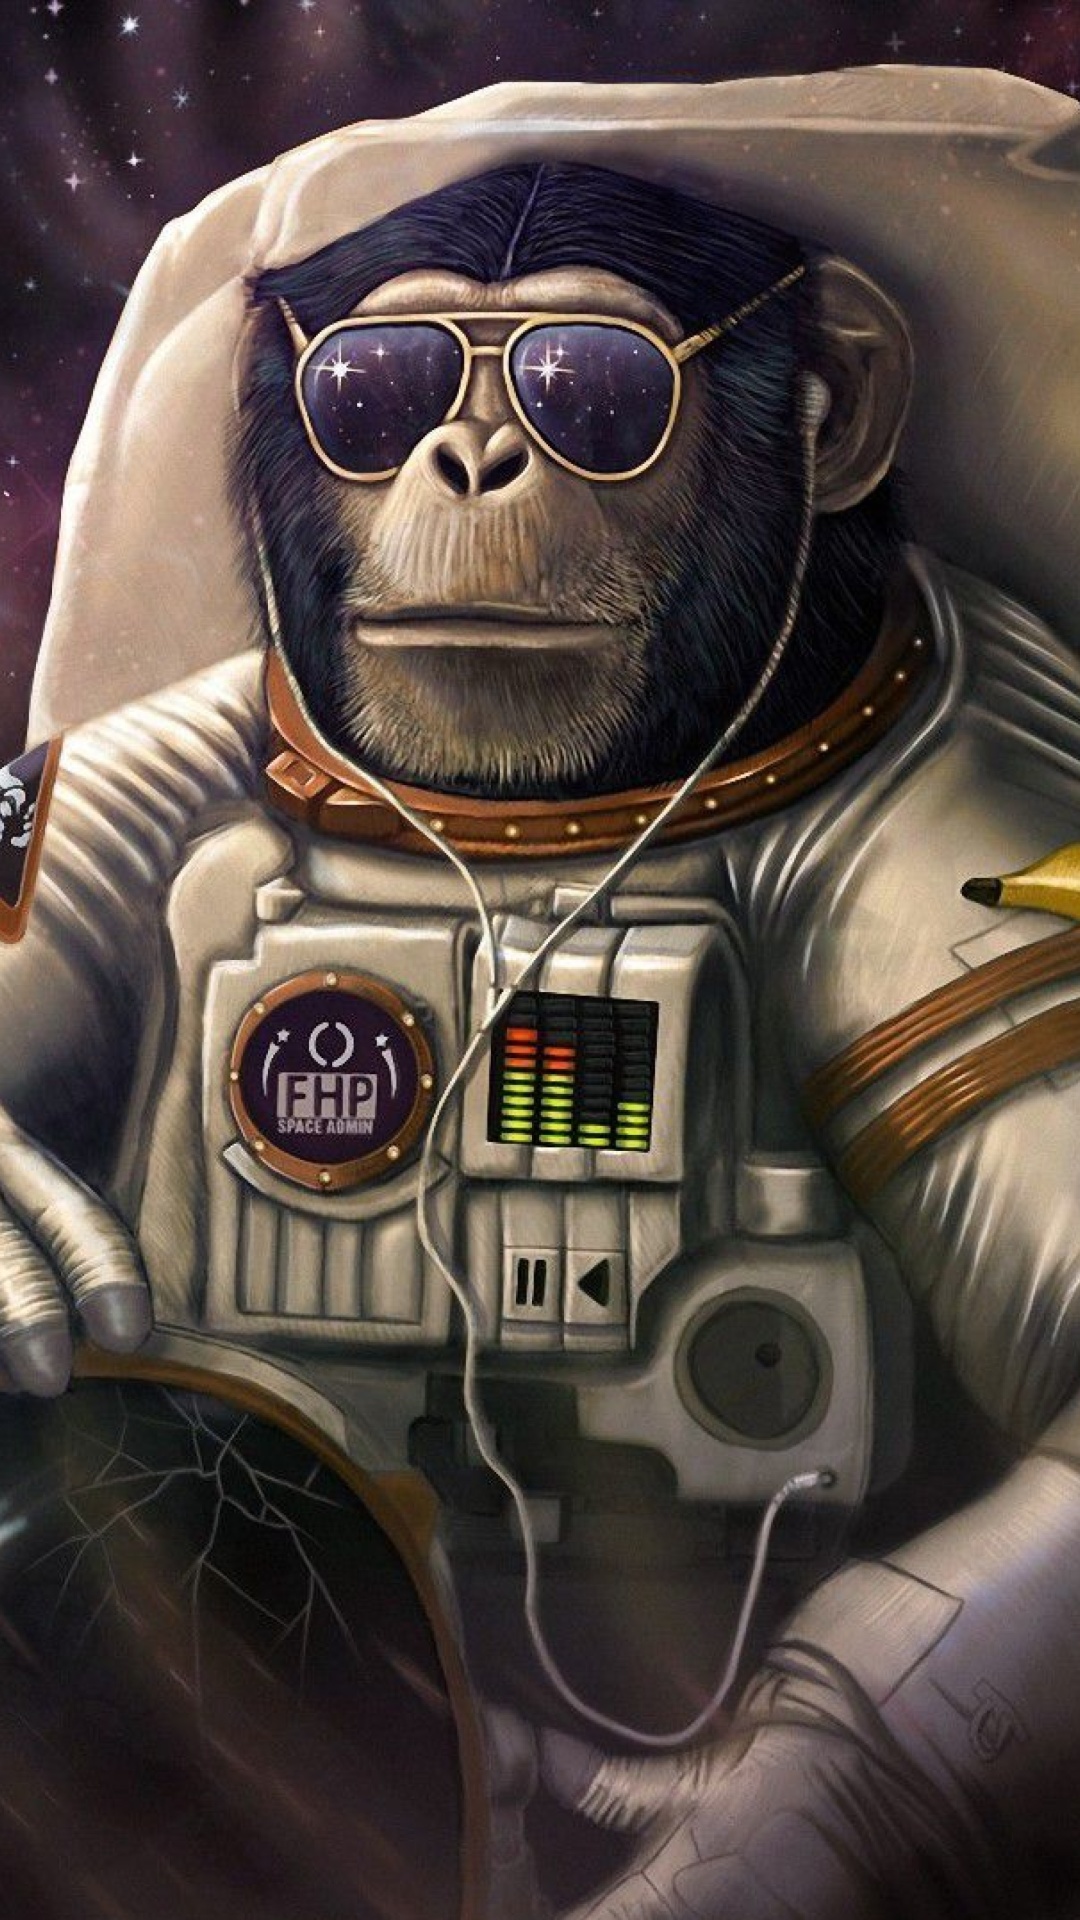 Das Monkeys and apes in space Wallpaper 1080x1920